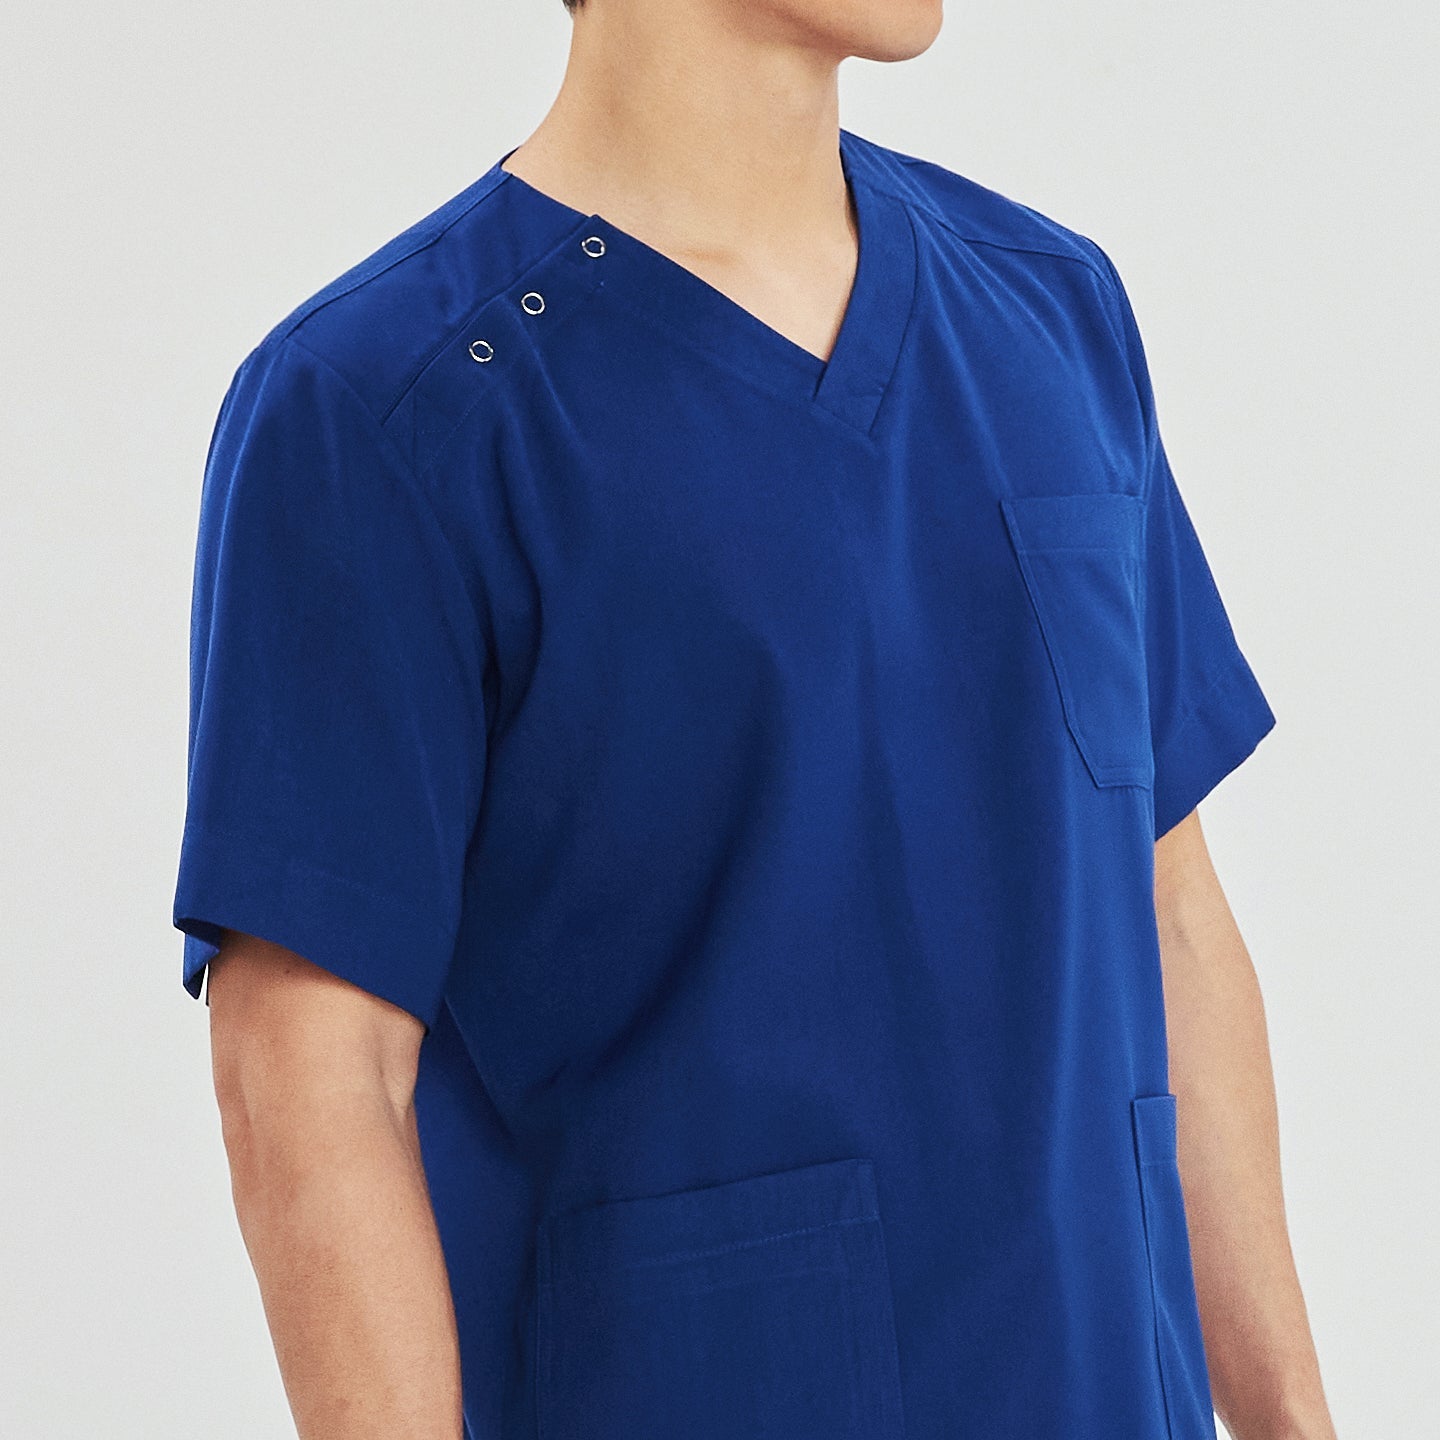 Close-up of a man wearing a scrub top with a V-neck, three-button shoulder detail, and a front chest pocket,Royal Blue